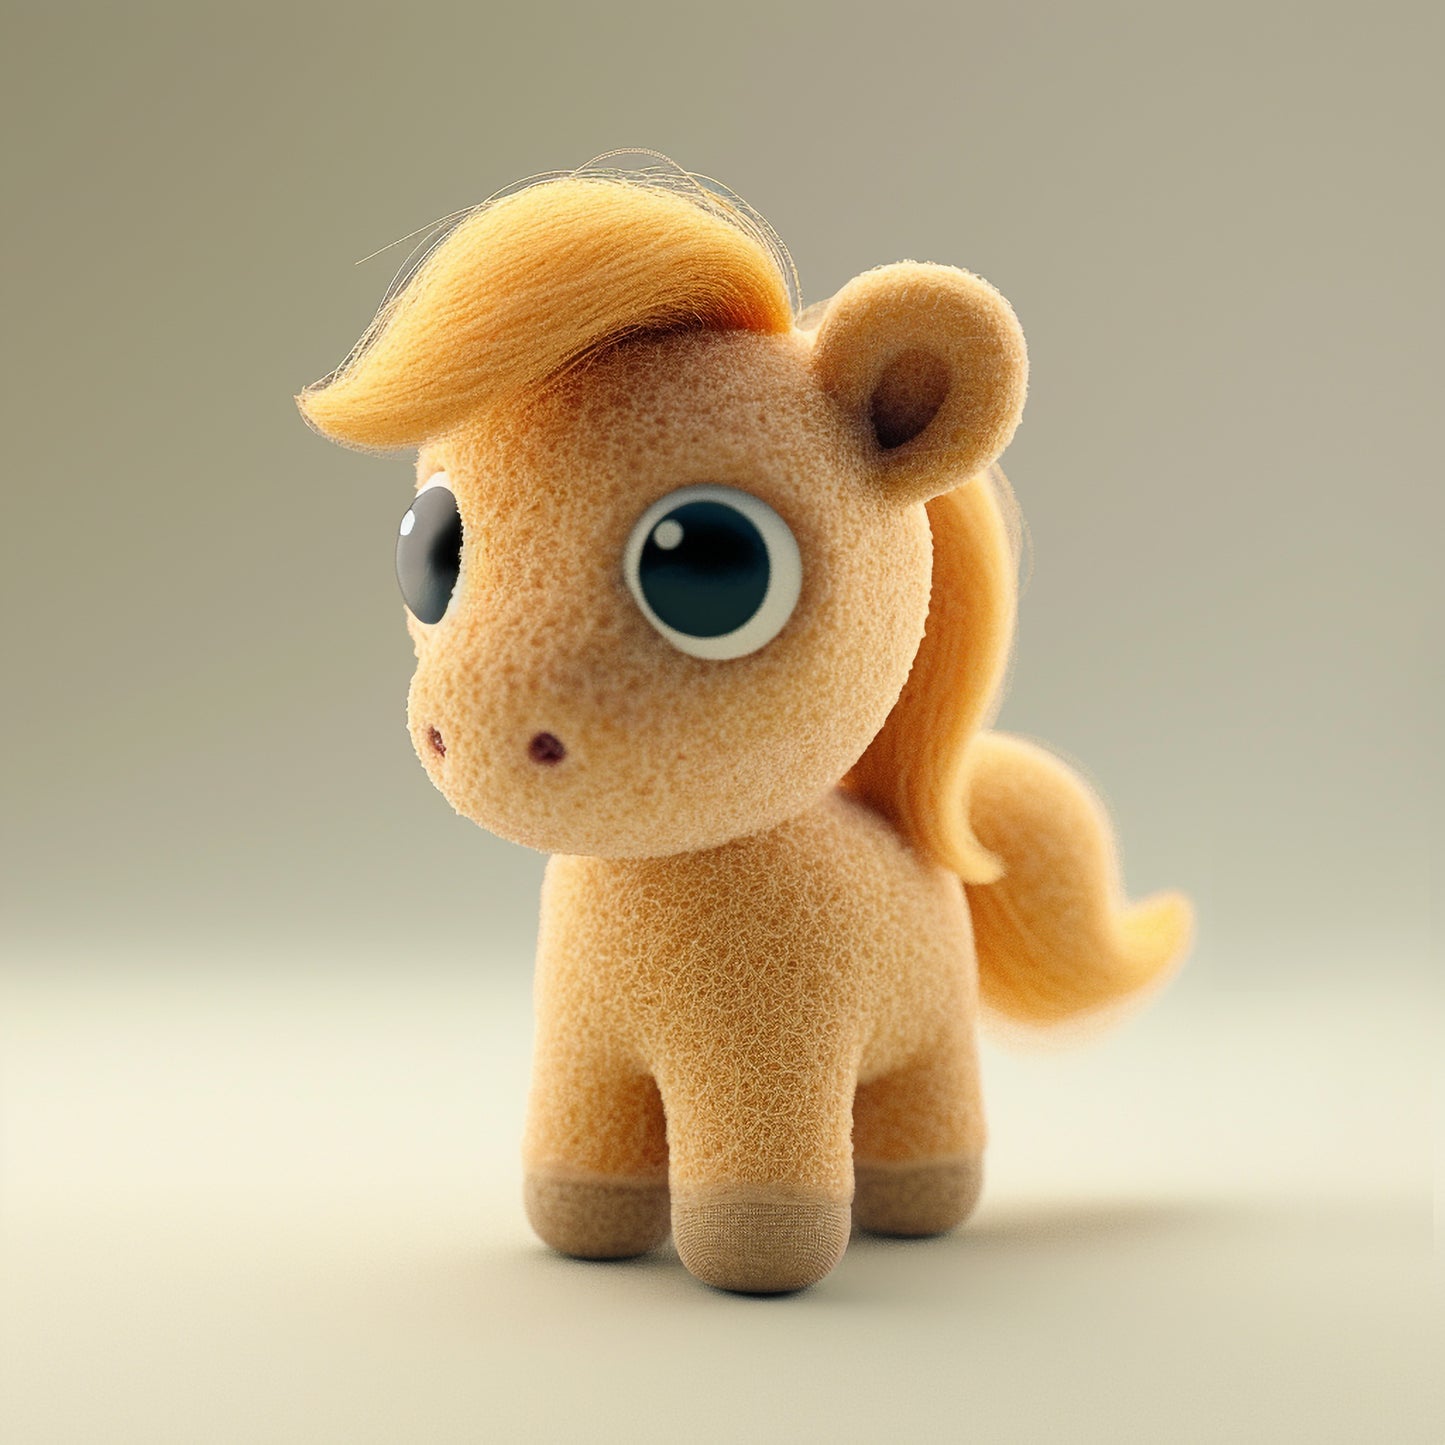 Adorable Needle Felted Horse Toy with Cute Expression